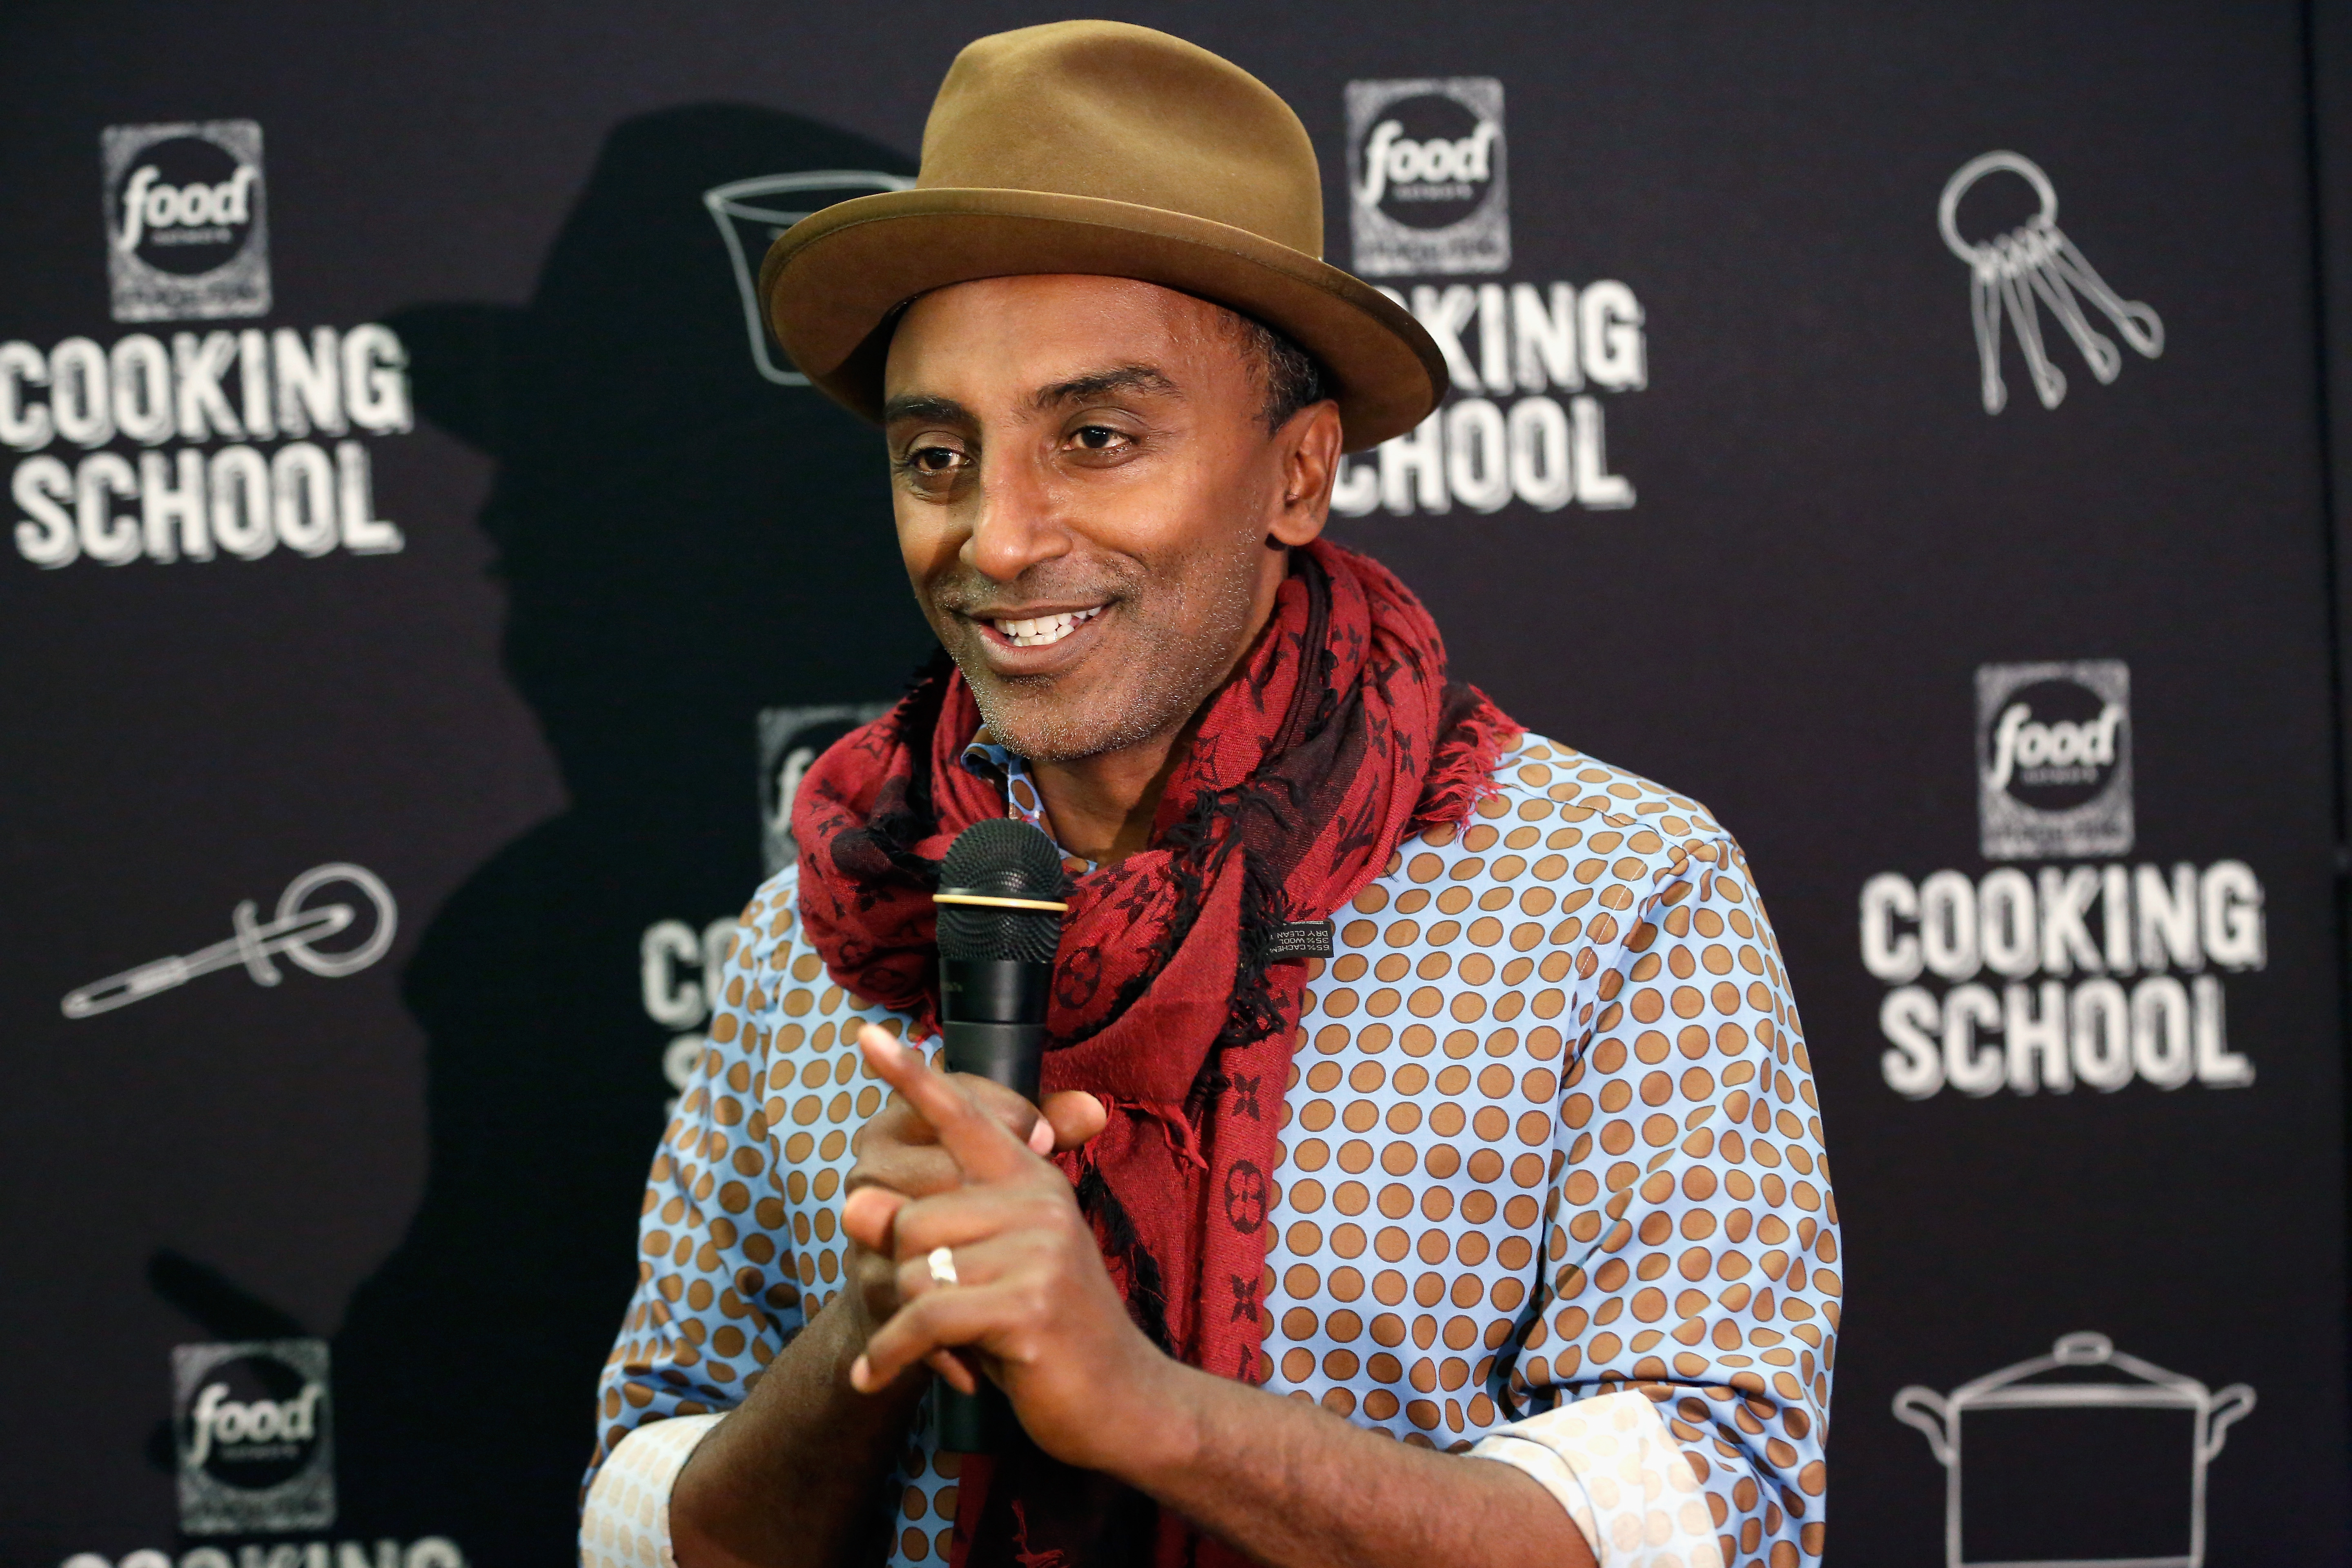 Food Network Magazine’s 2nd Annual Cooking School Featuring Marcus Samuelsson